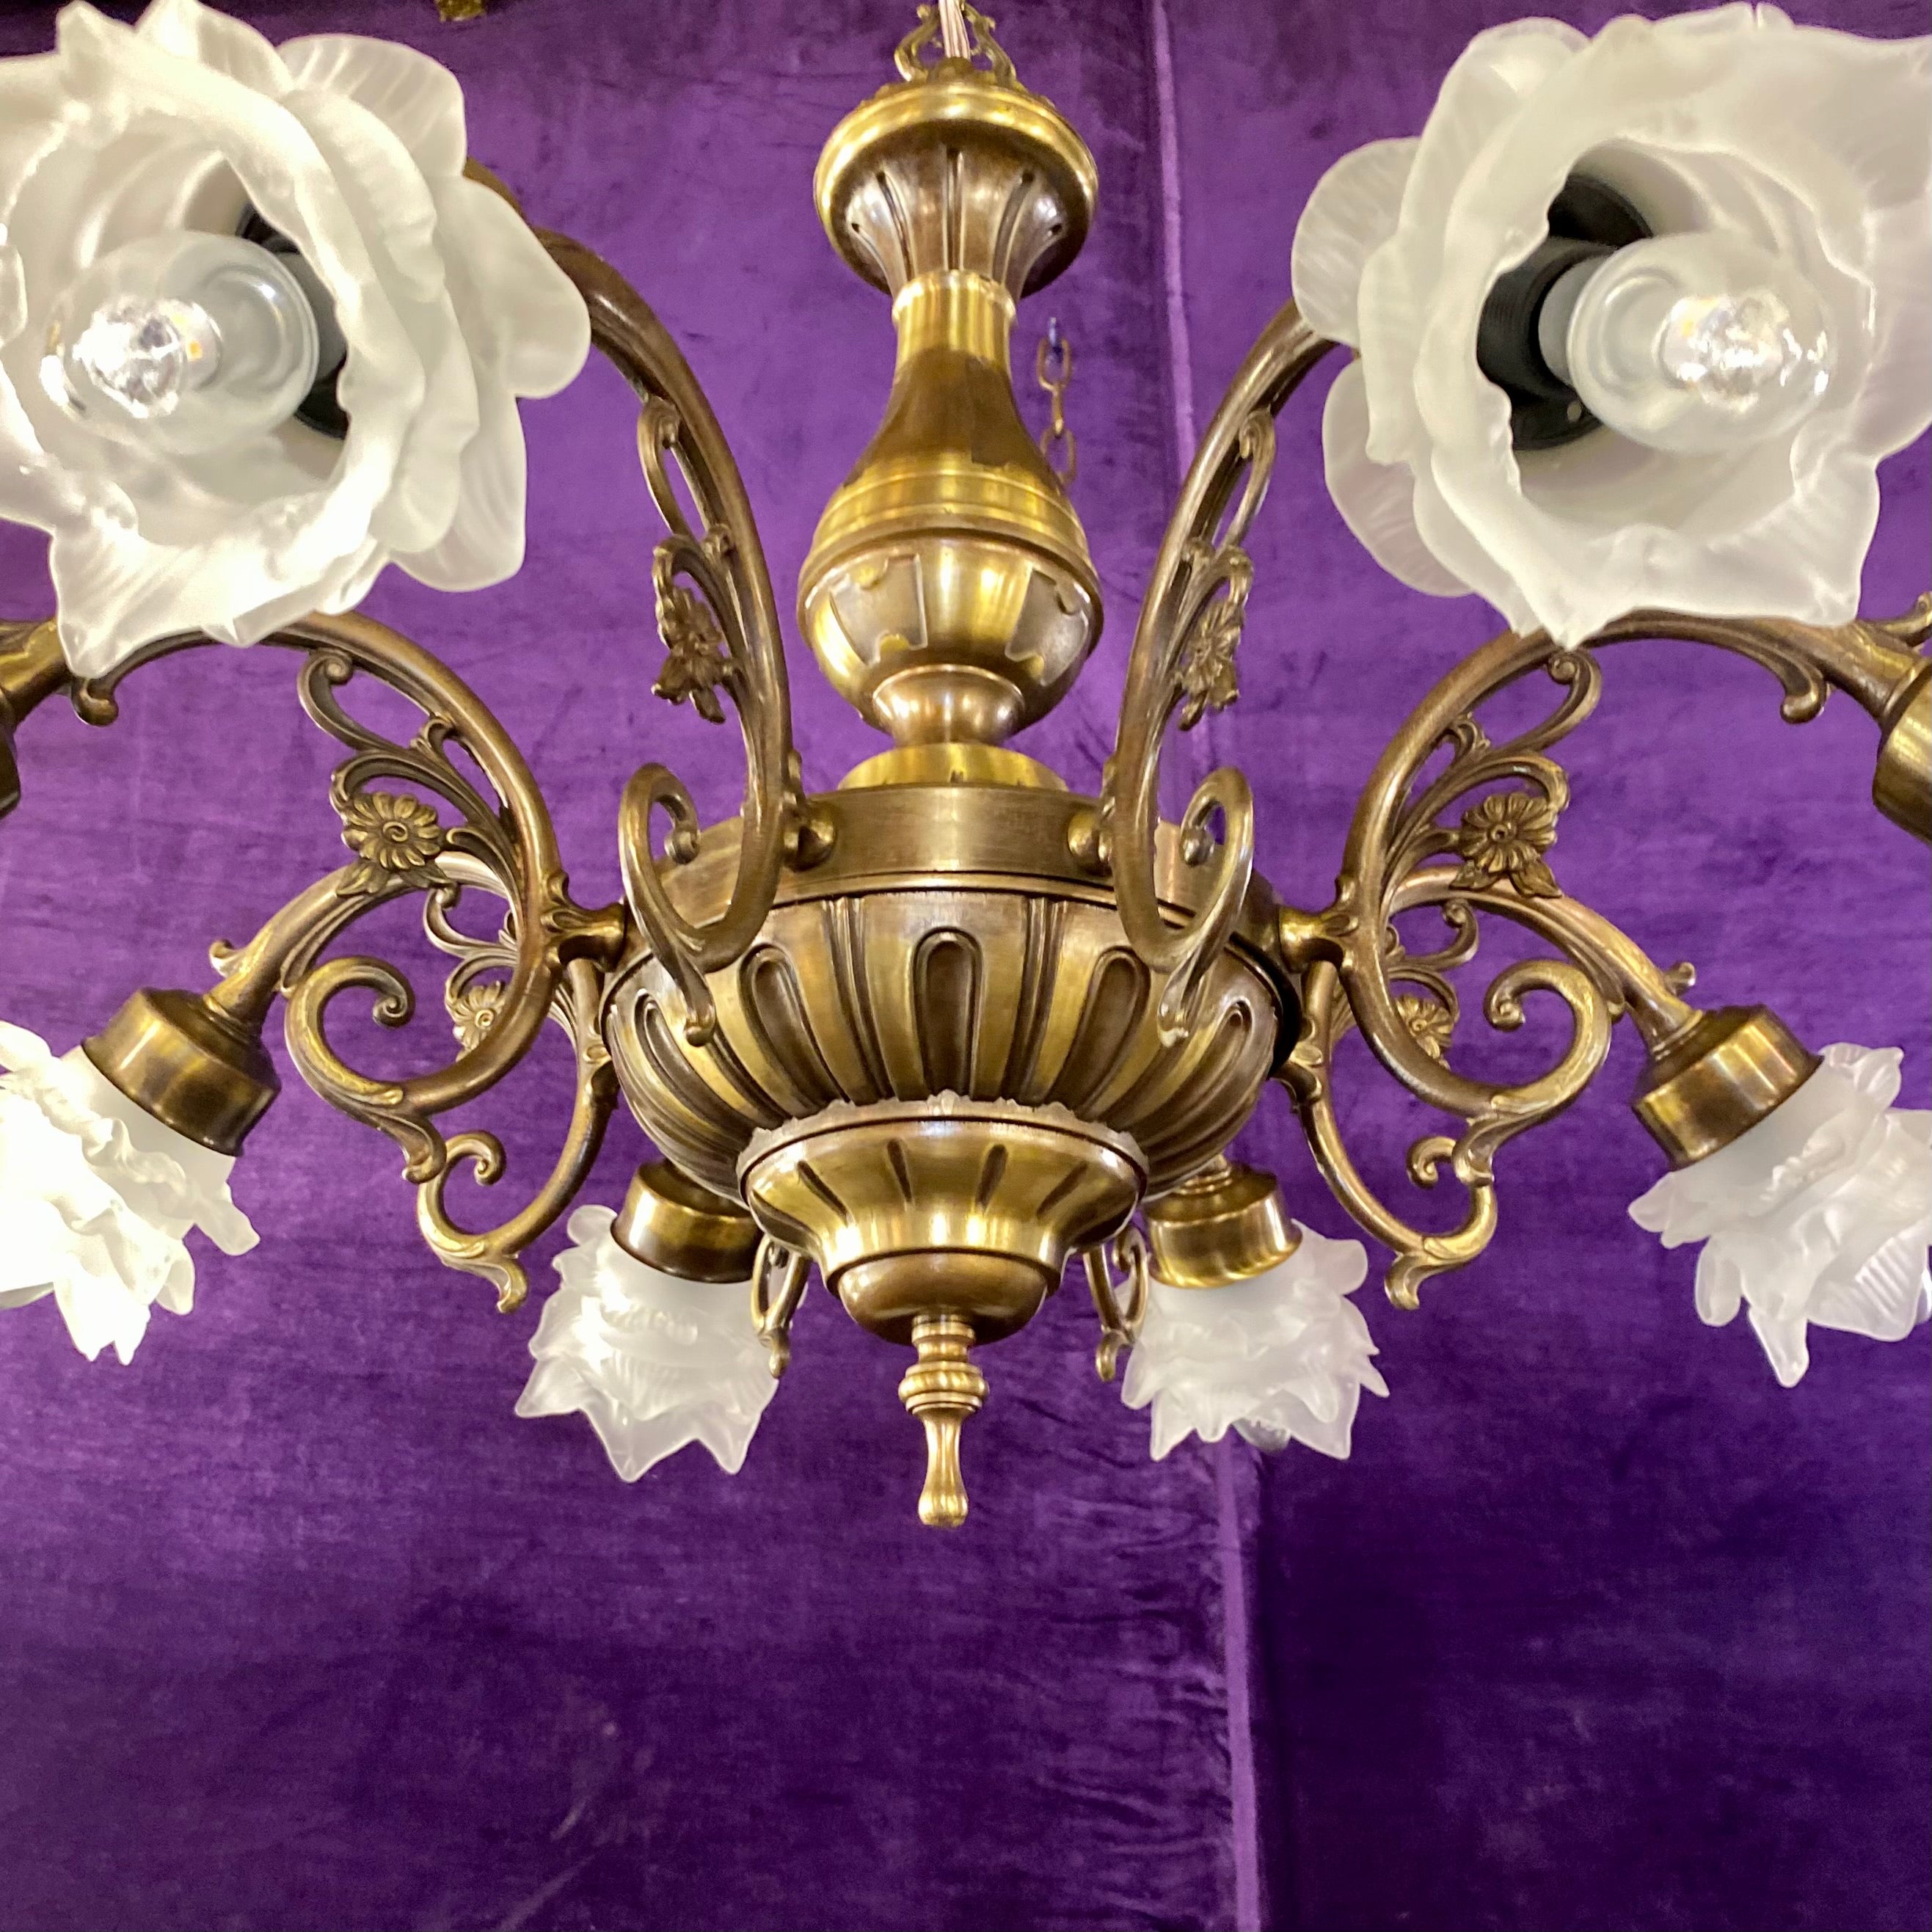 Antique Brass Chandelier with Frosted Glass Shades